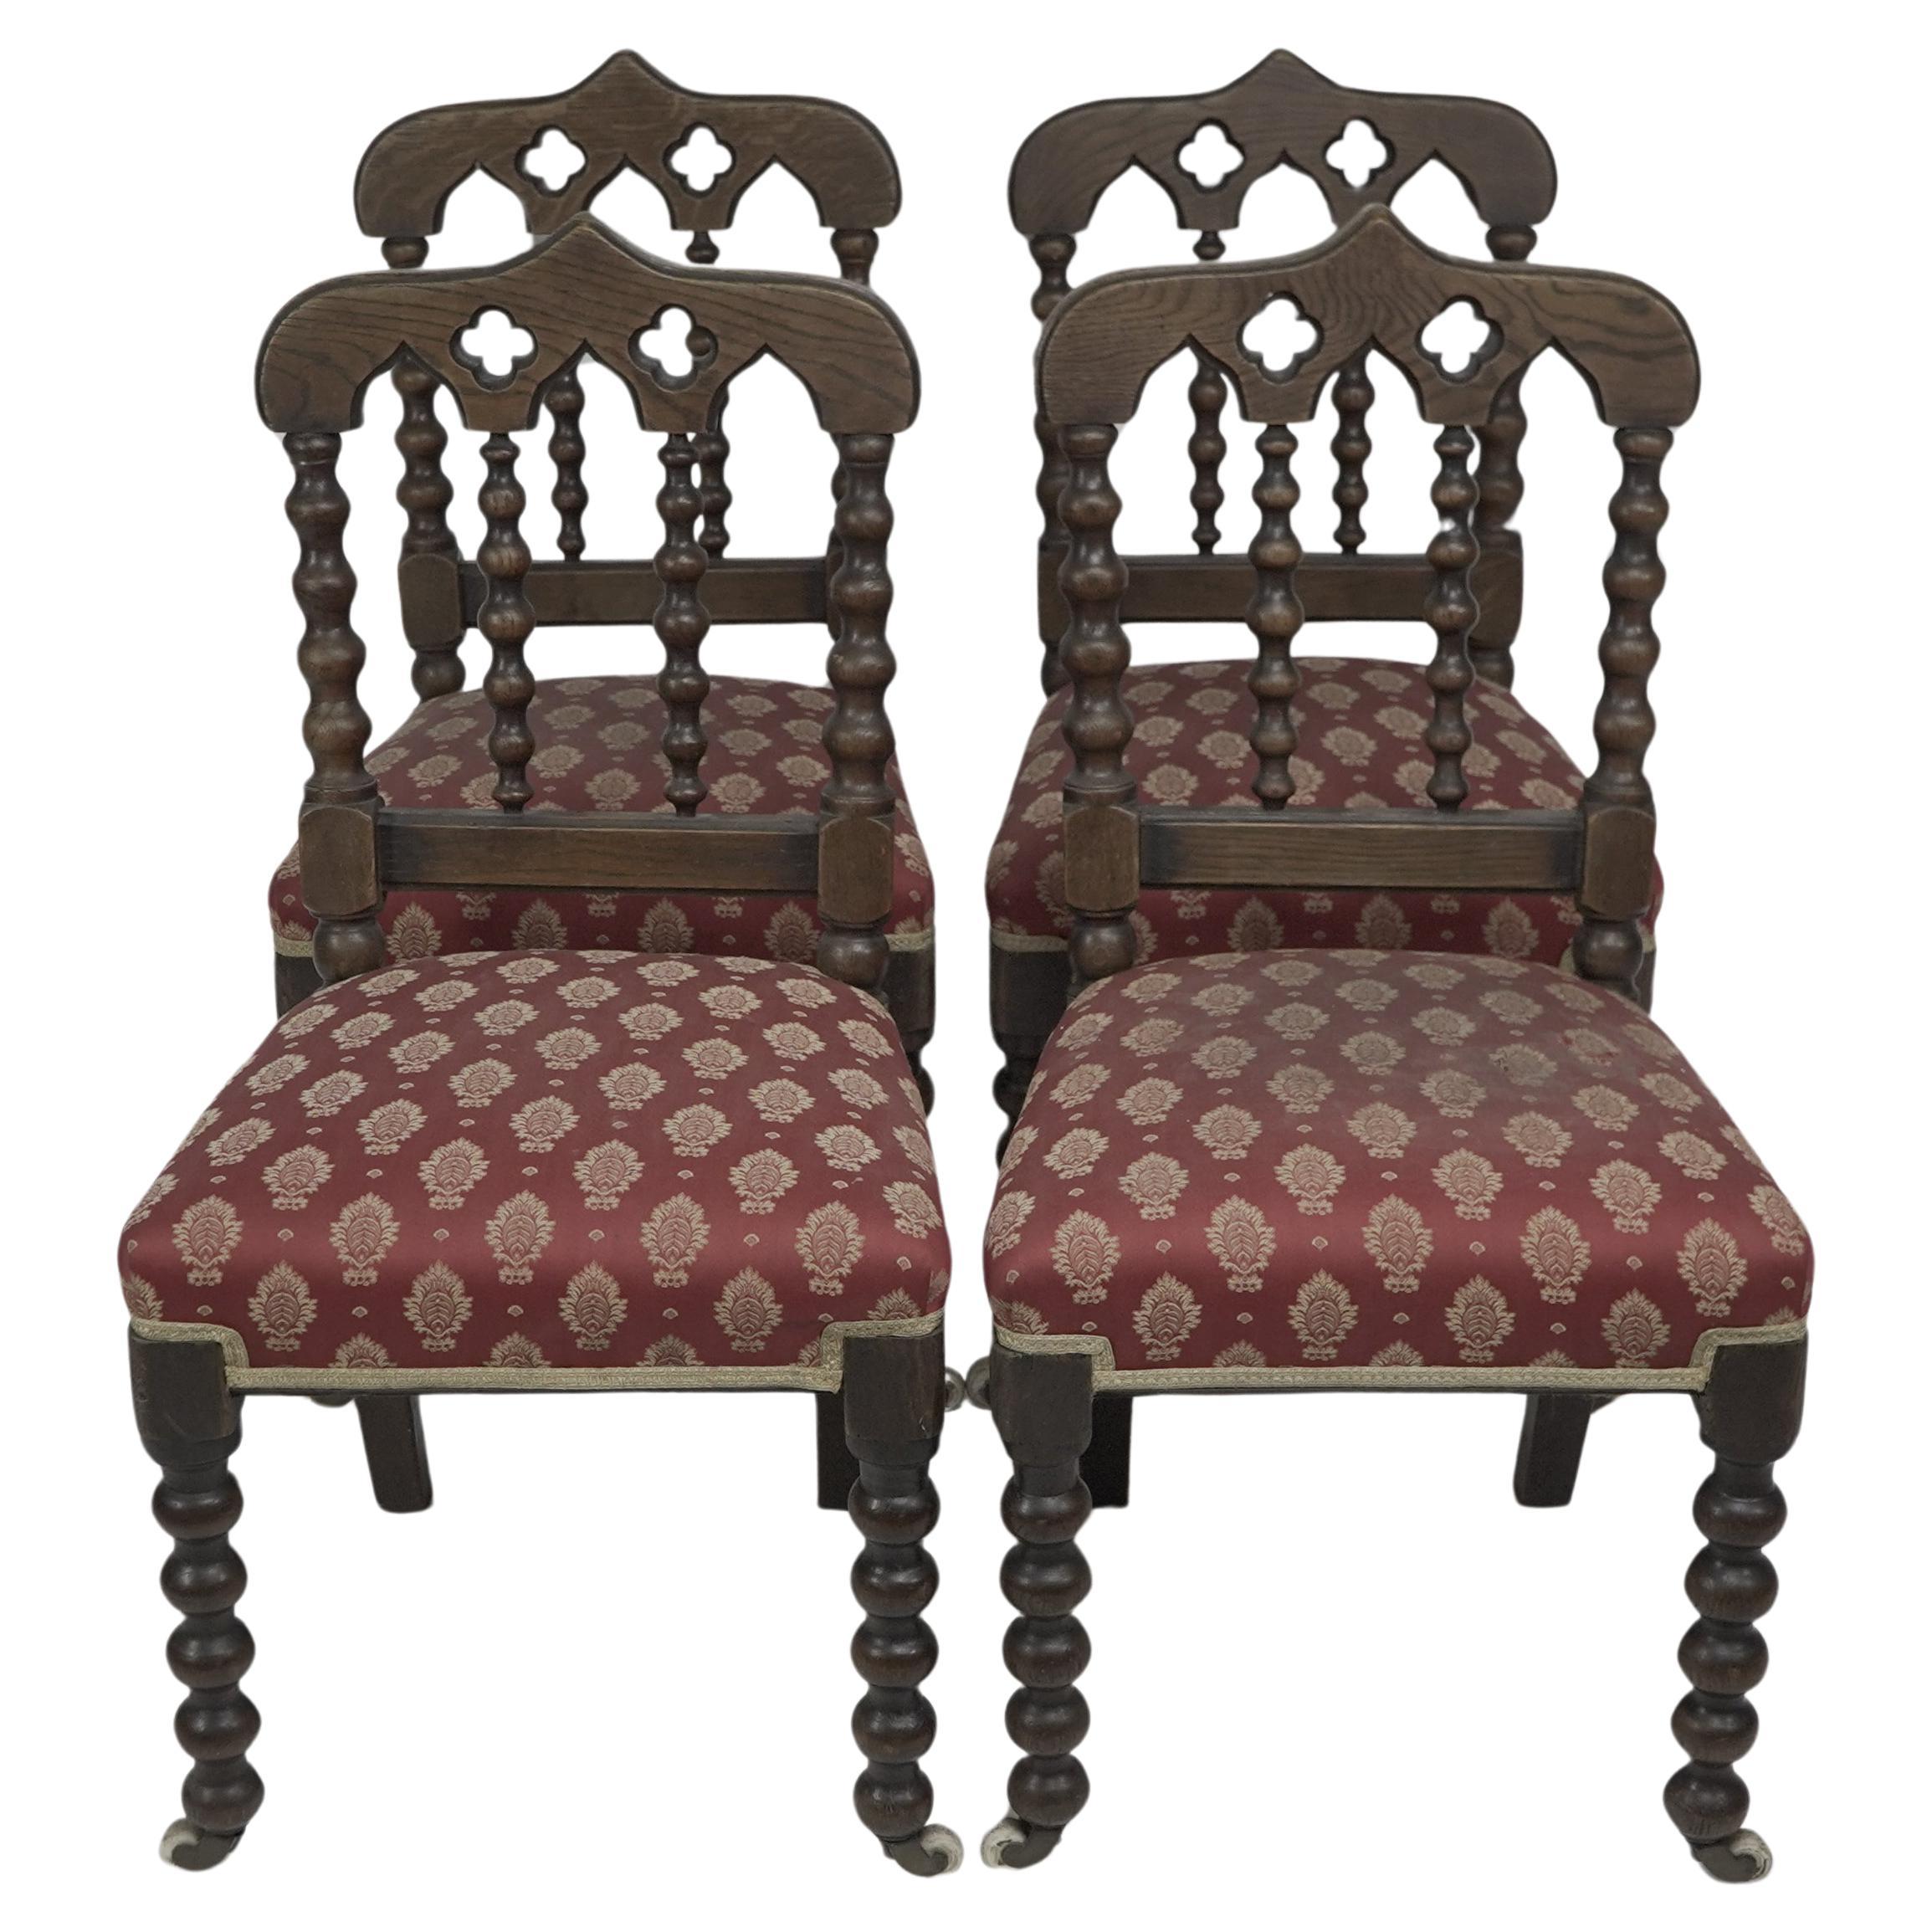 A good quality set of four Gothic Revival oak dining chairs with bobbin turnings